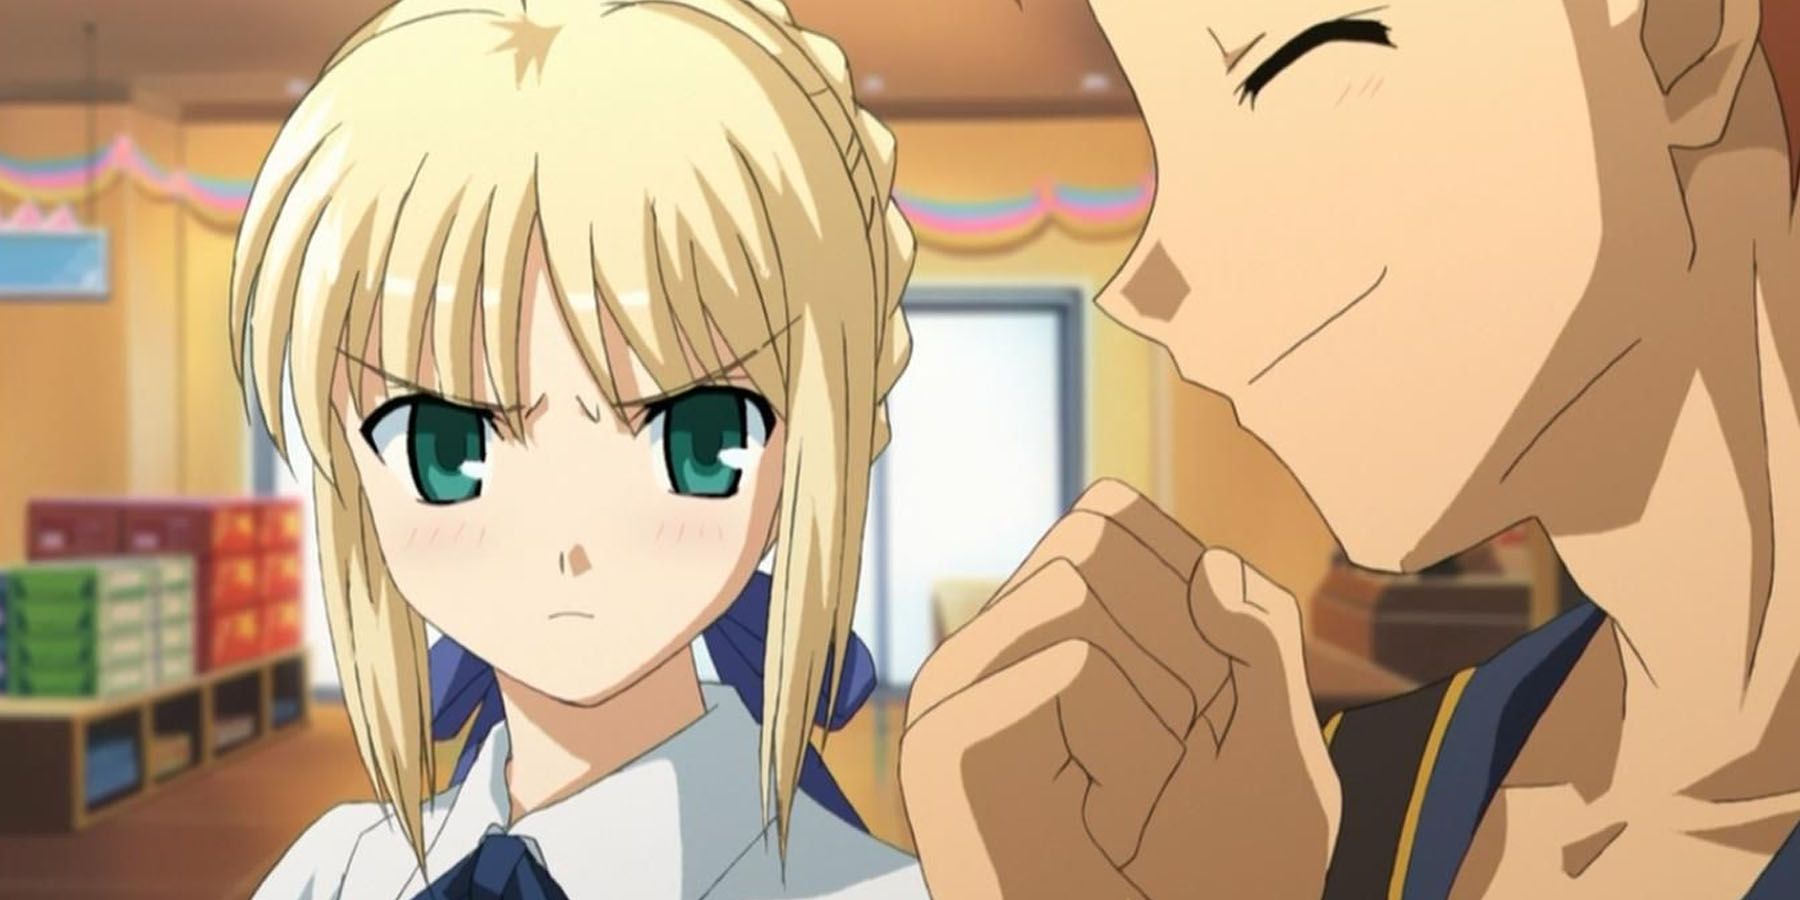 Shiro and Saber in Fate Stay Night